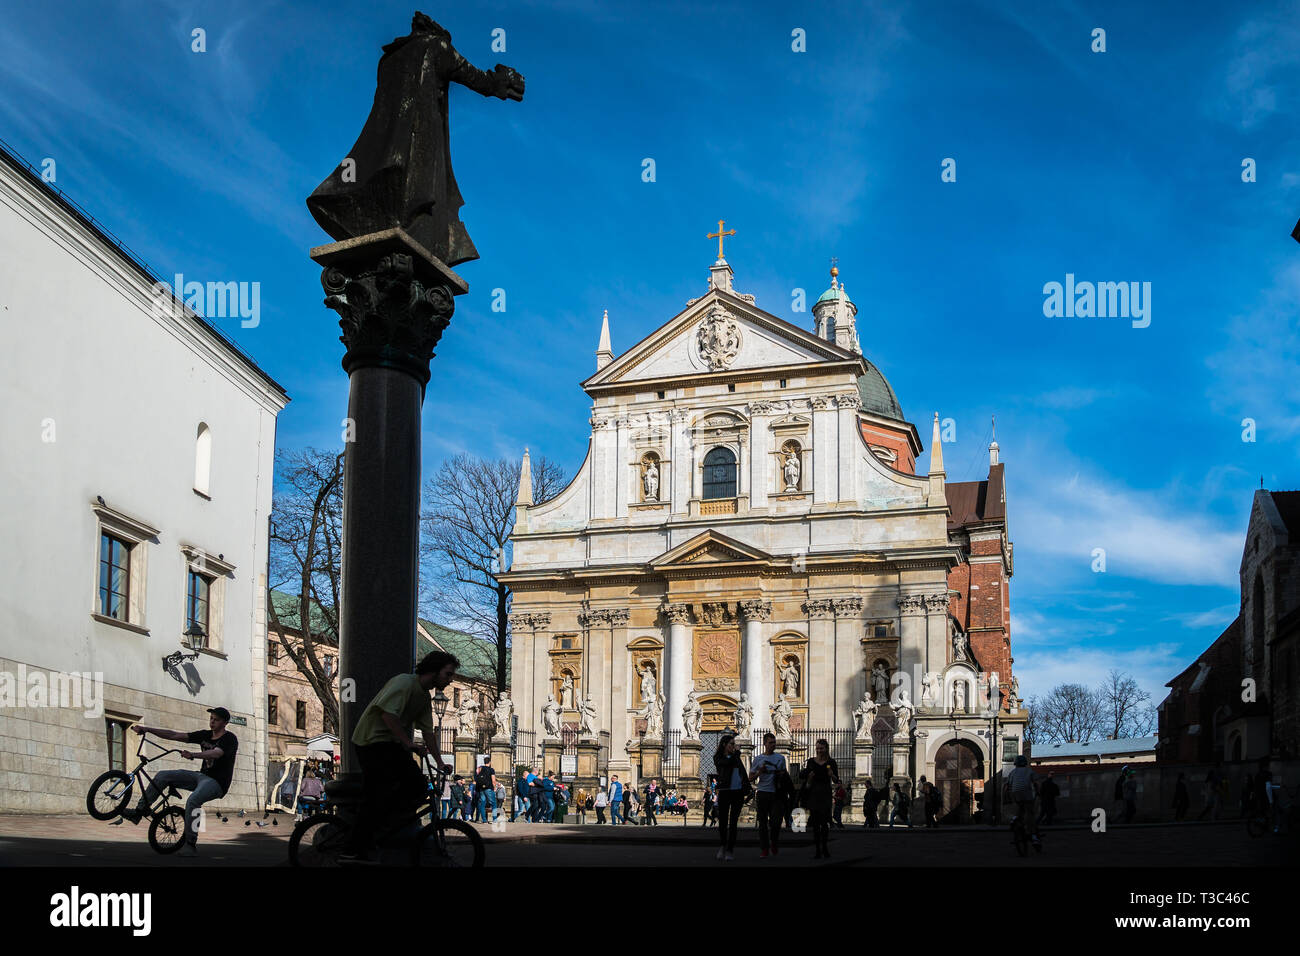 Krakow, Poland - March 22, 2019 - a boy on a cycle on a square in front of Saints Peter and Paul Church Stock Photo